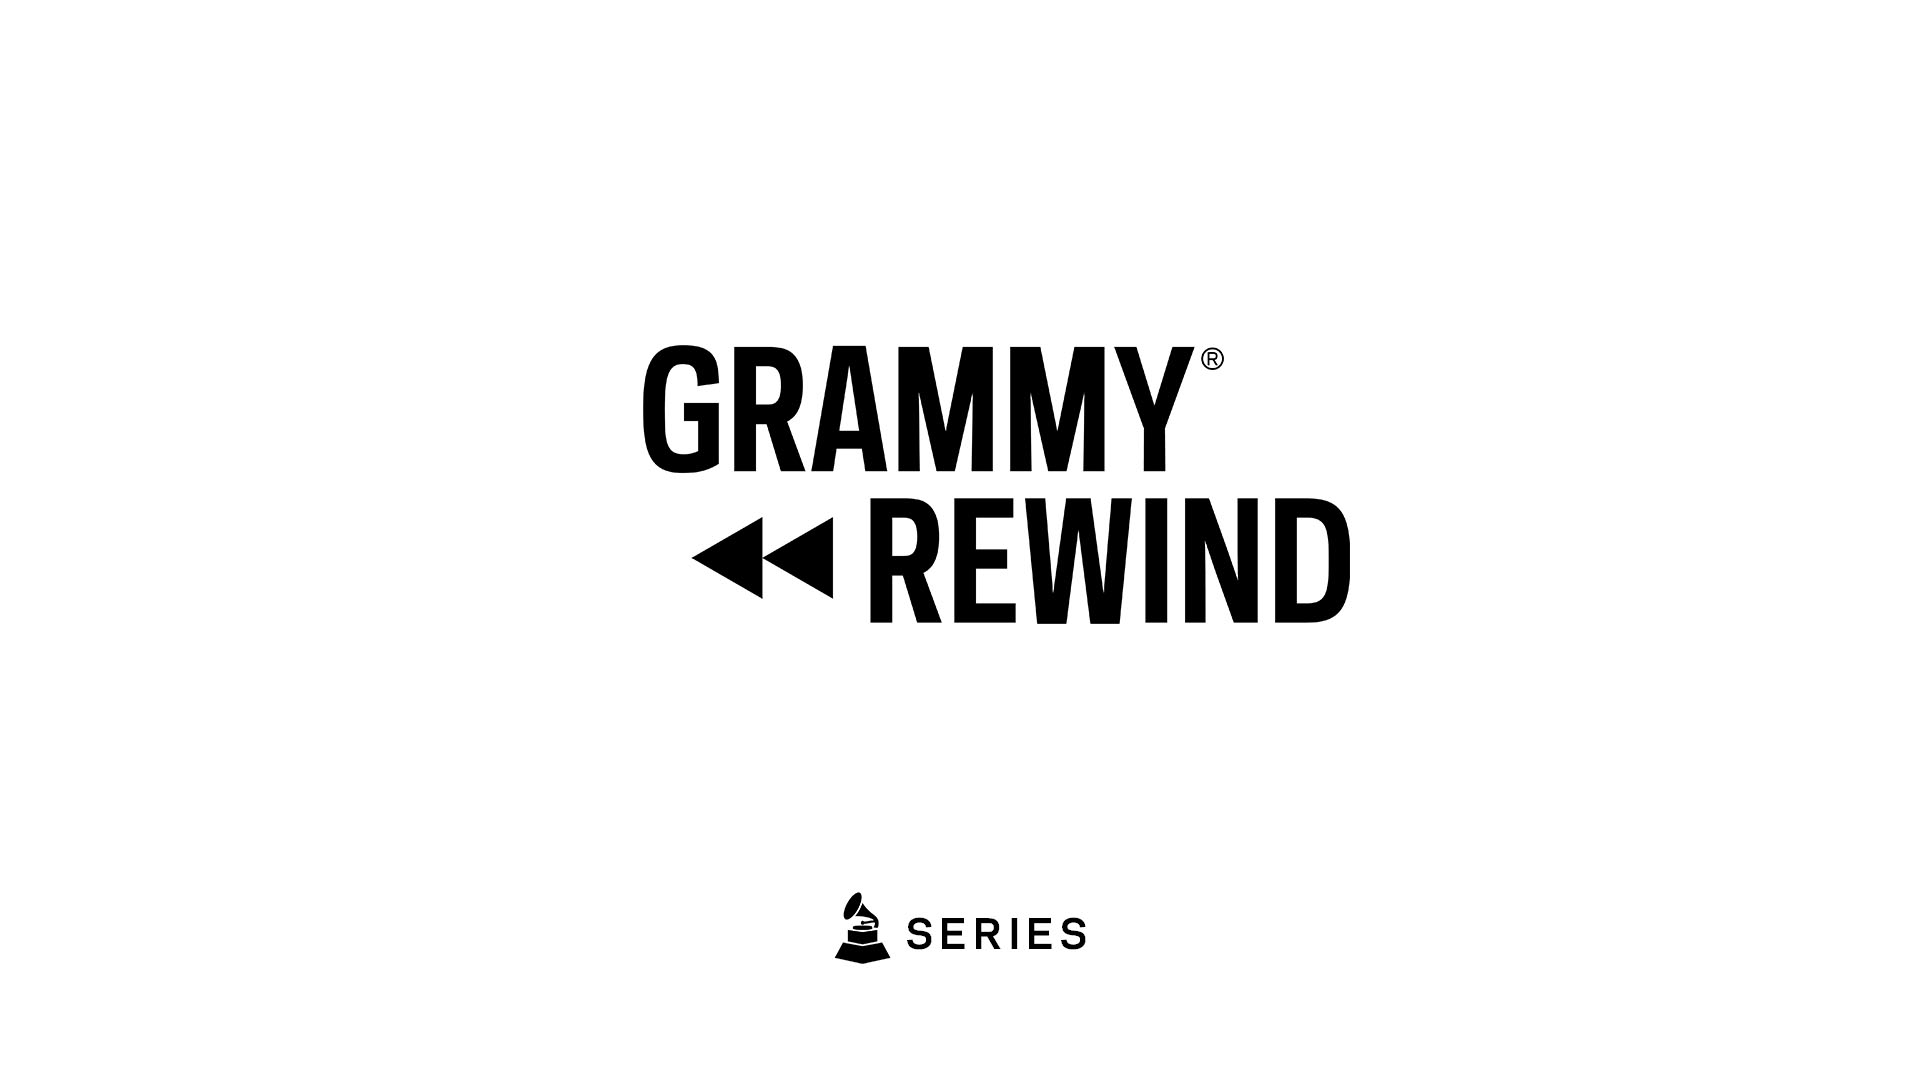 Watch MC Hammer Win A GRAMMY For "U Can't Touch This" In 1991 | GRAMMY Rewind